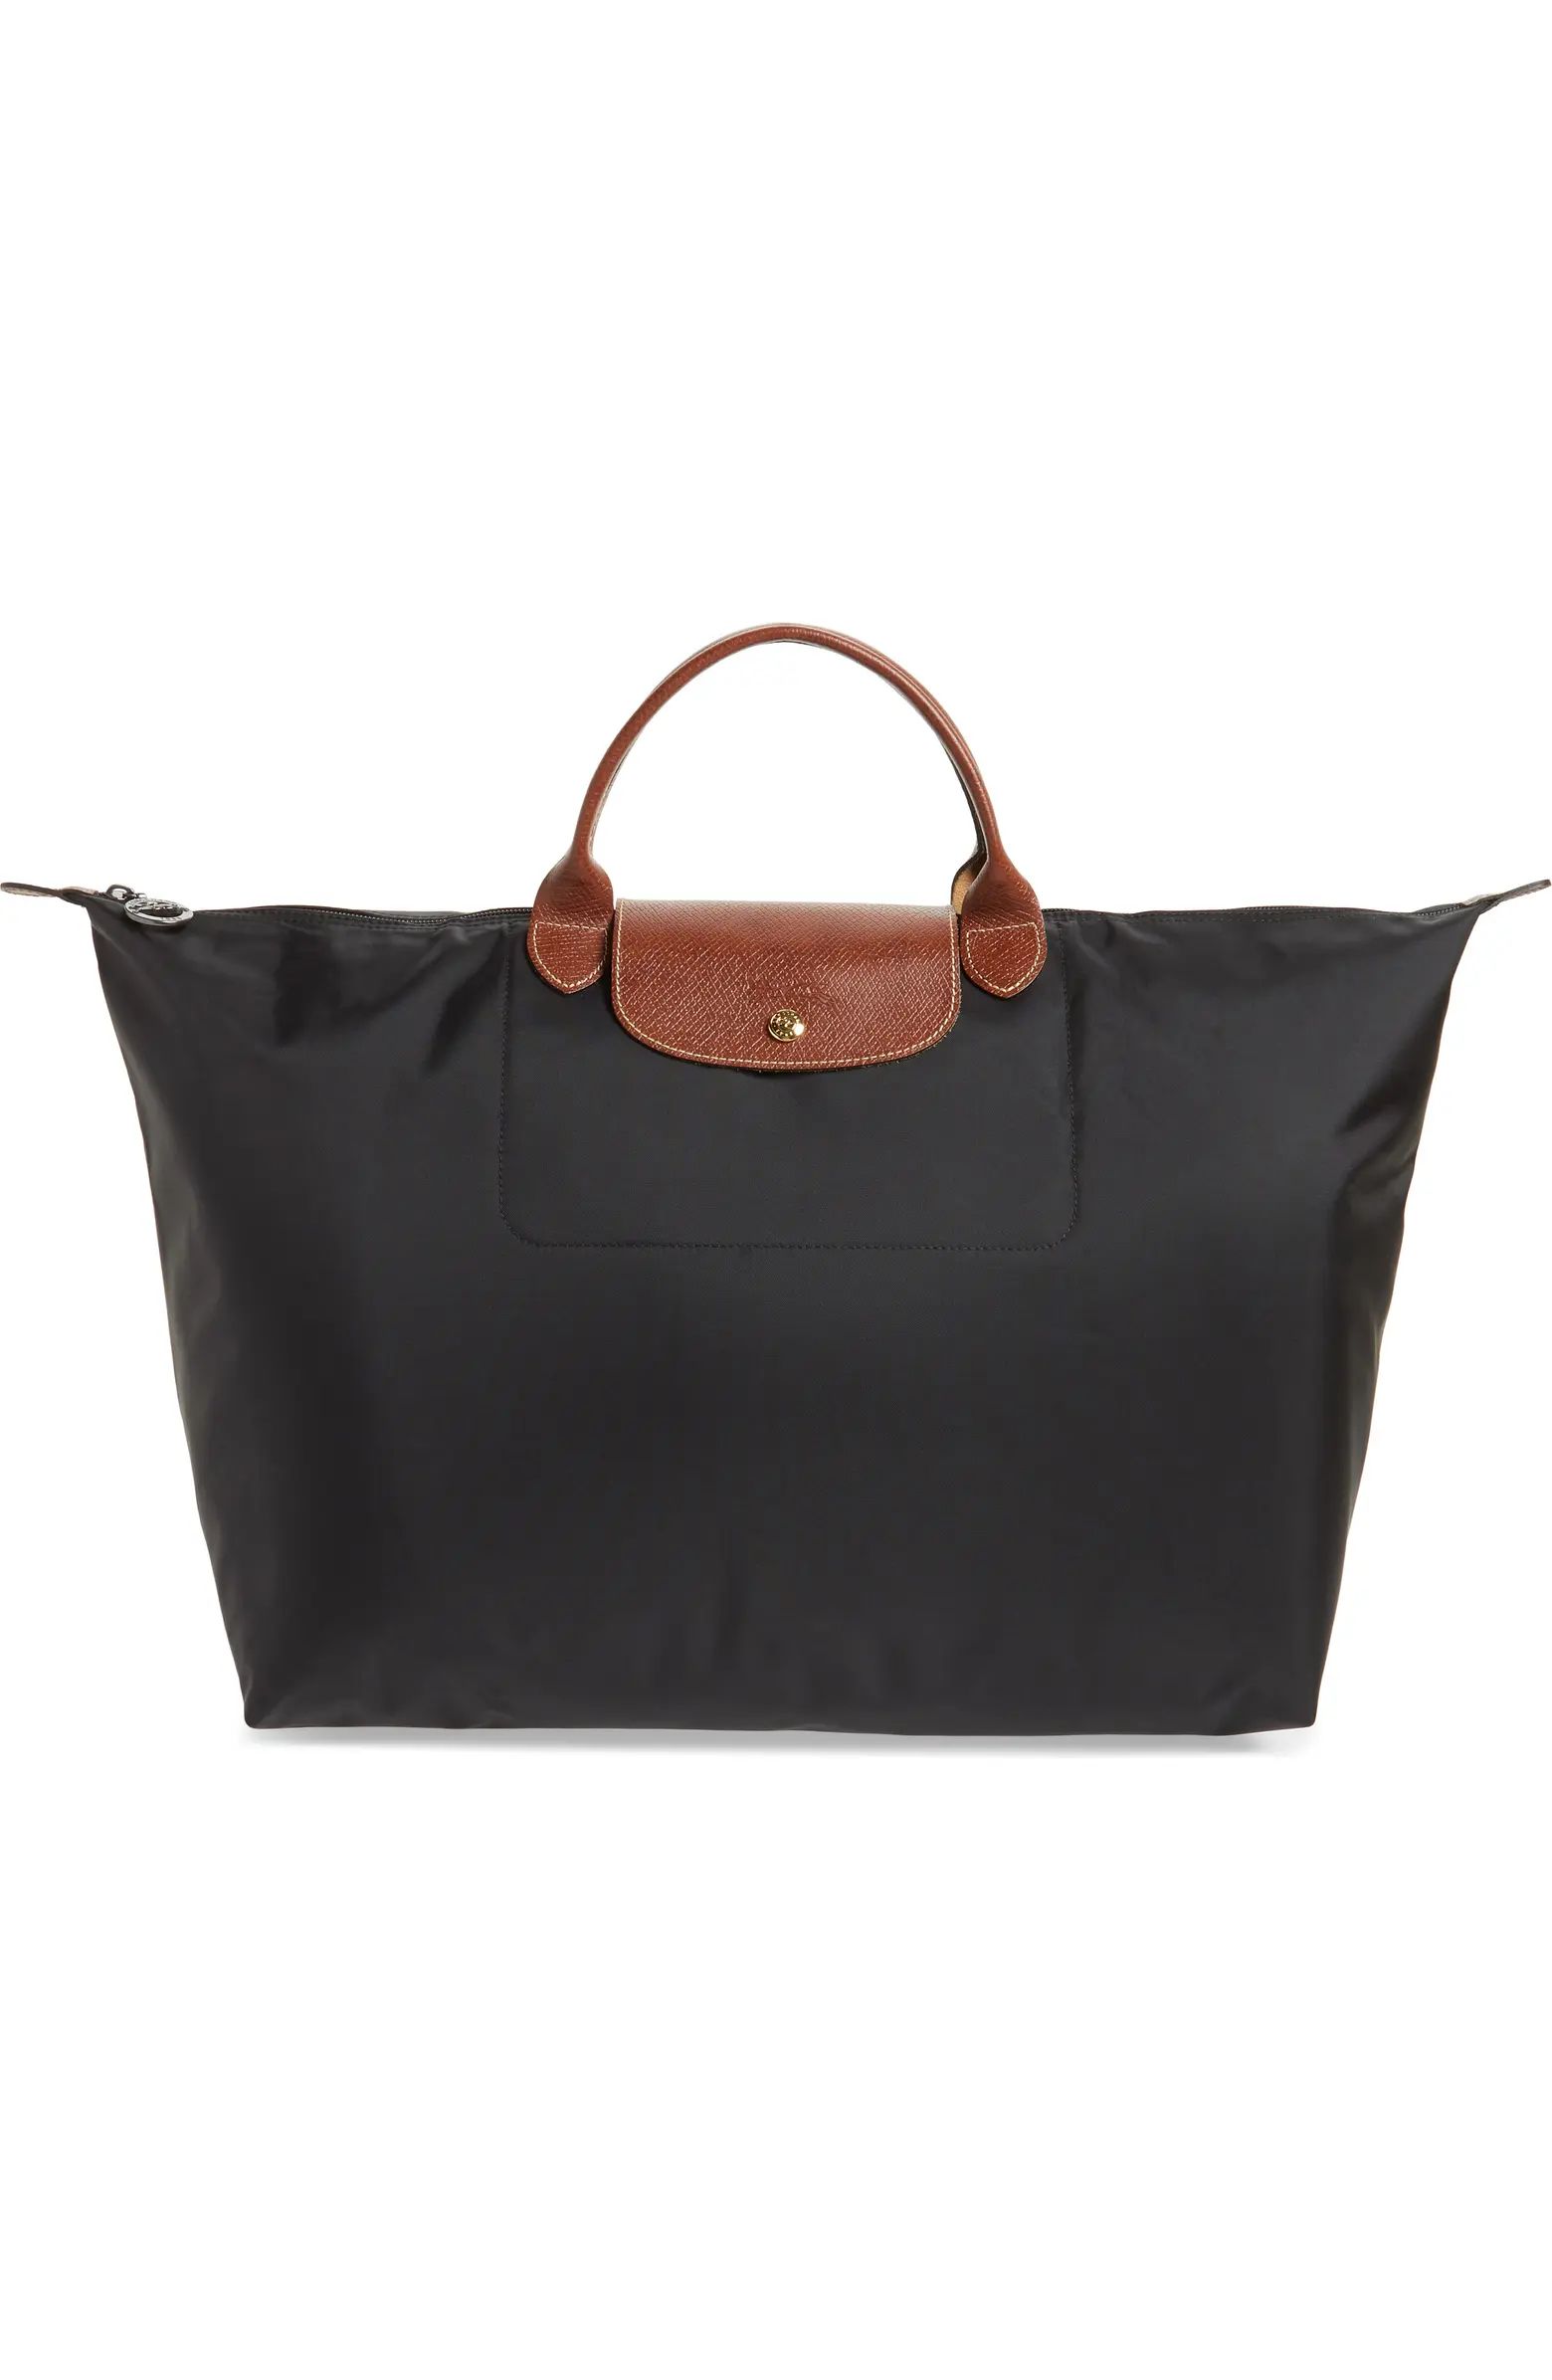 'Le Pliage' Overnighter | Nordstrom